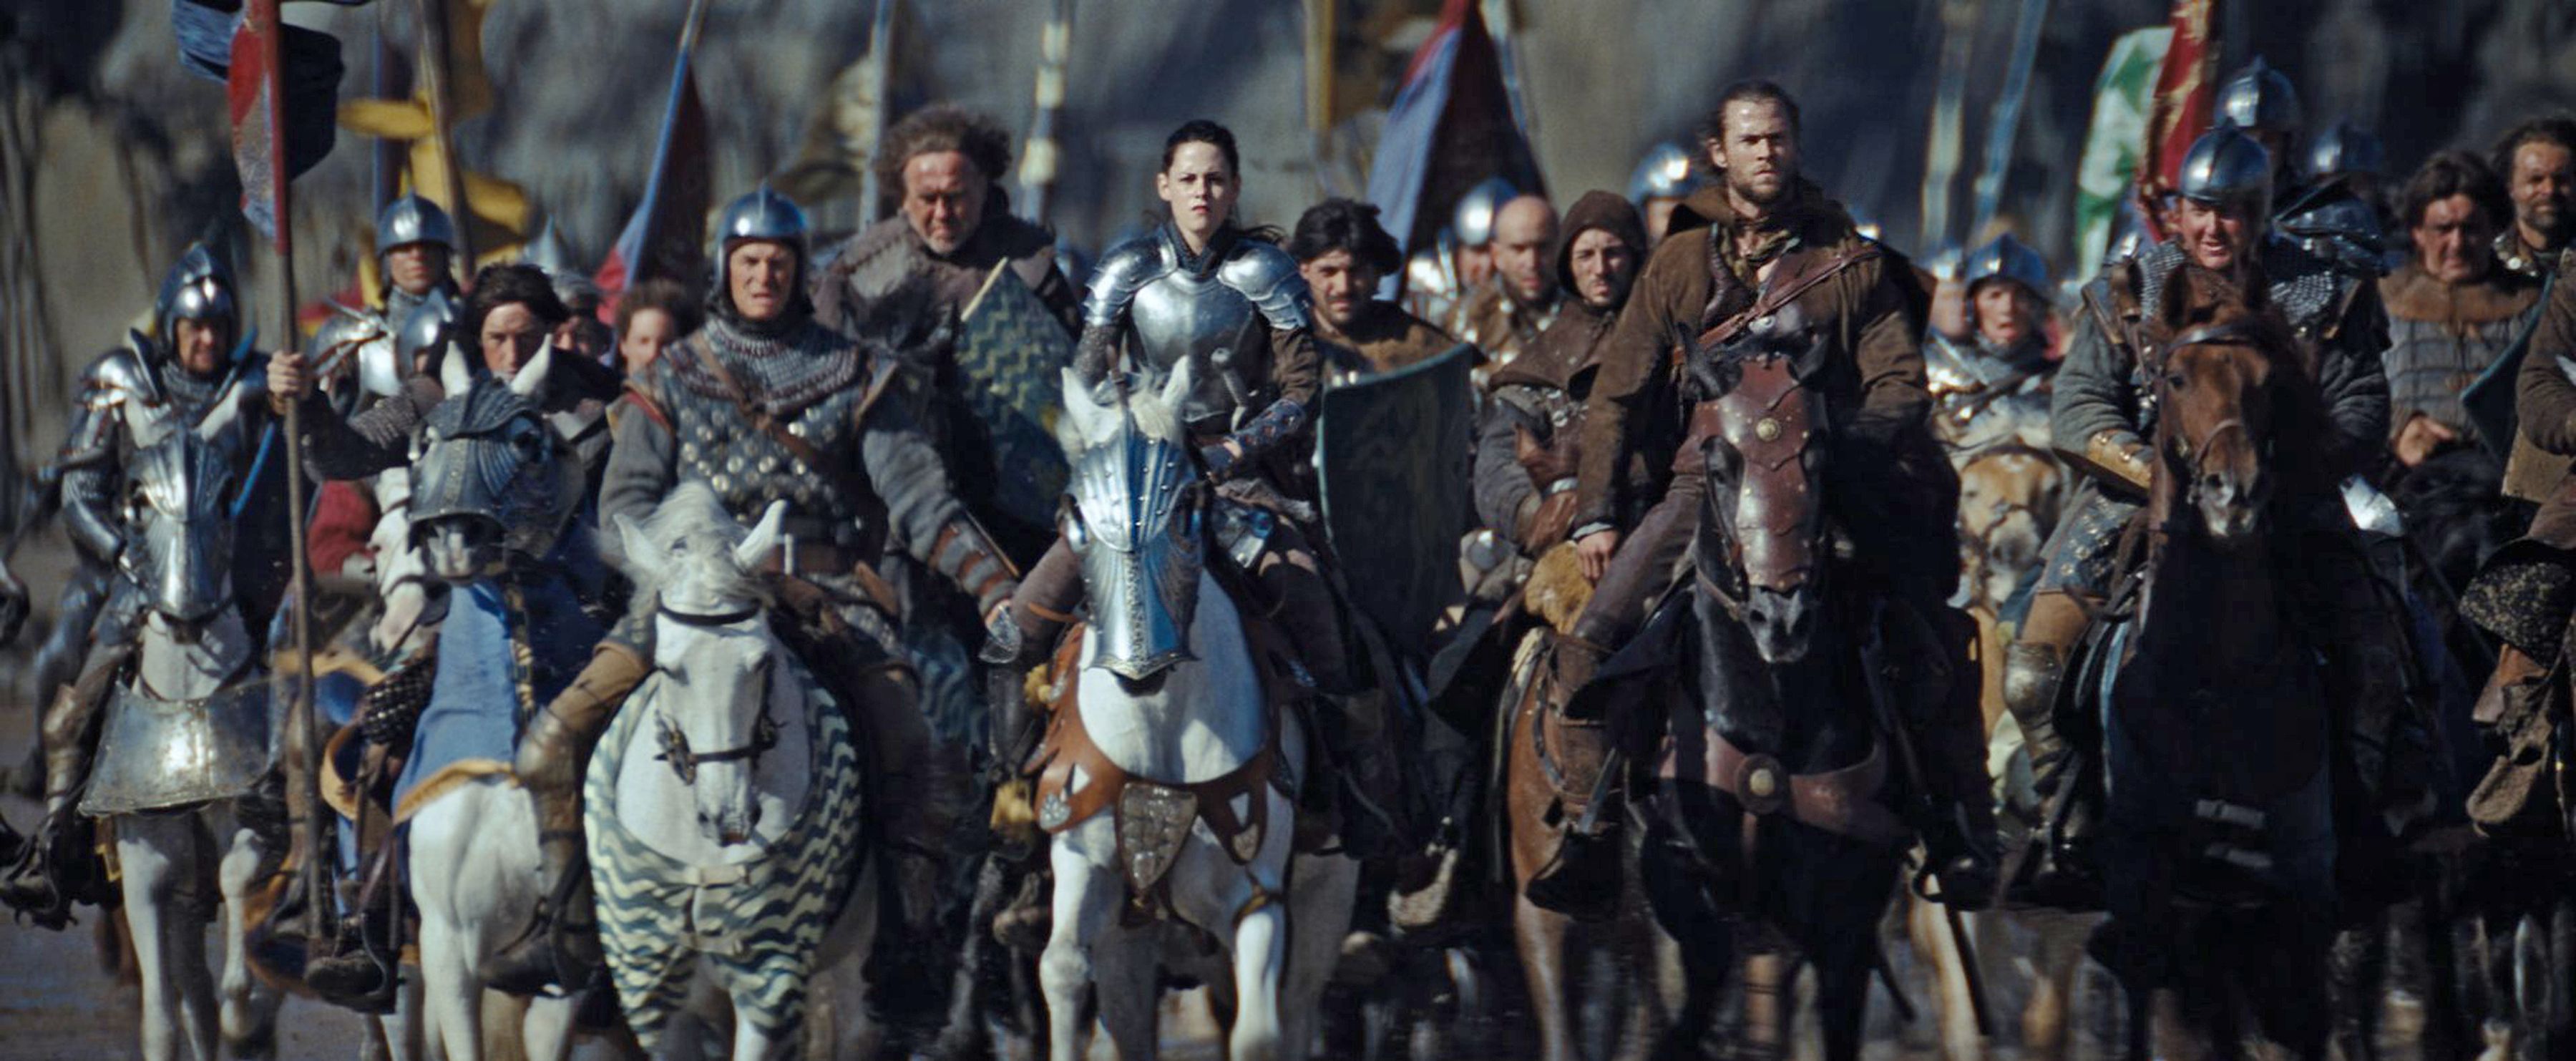 Snow White and the Huntsman Photo #4